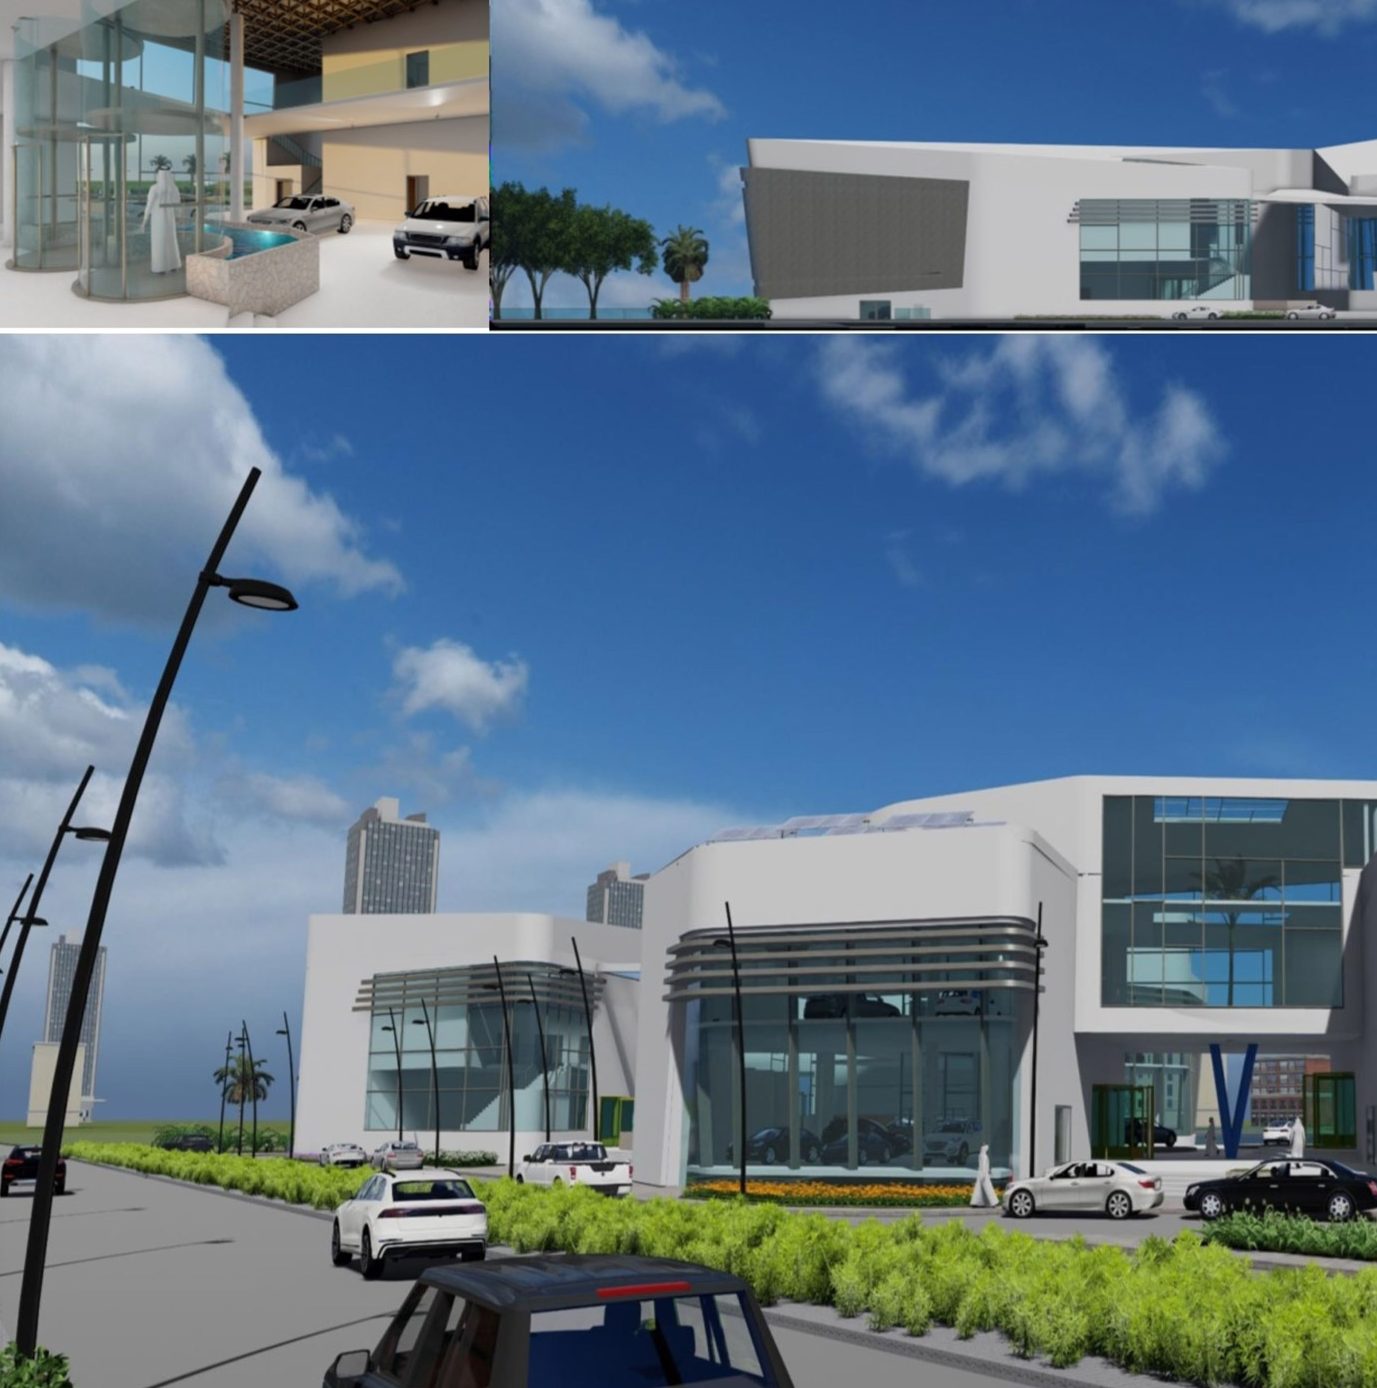 Collage of renders showing a large car showroom building